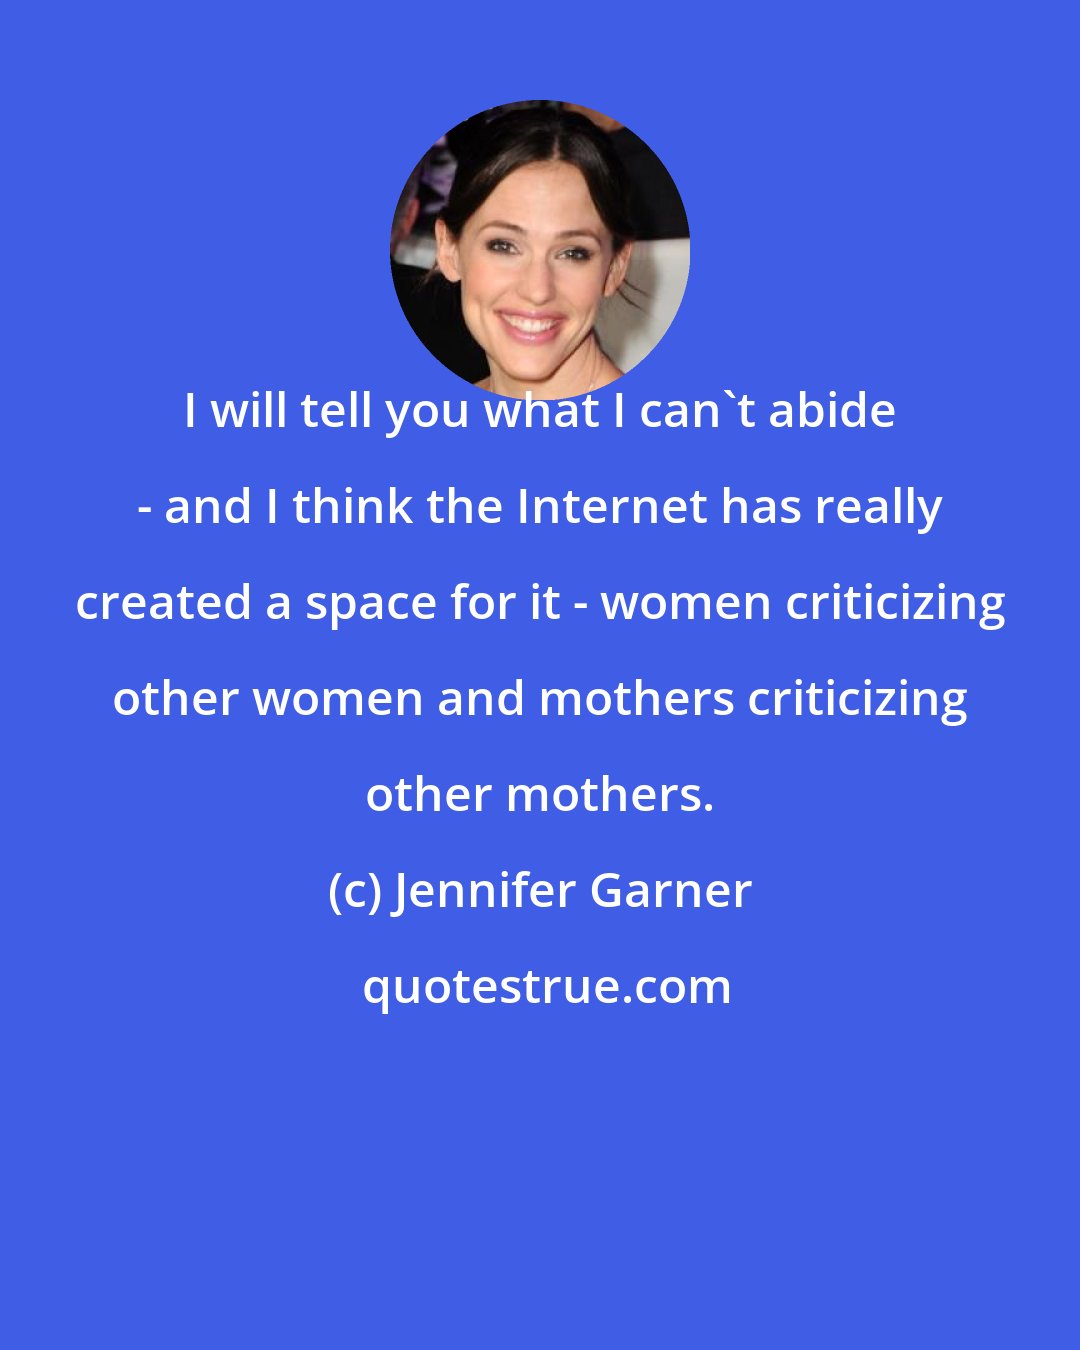 Jennifer Garner: I will tell you what I can't abide - and I think the Internet has really created a space for it - women criticizing other women and mothers criticizing other mothers.